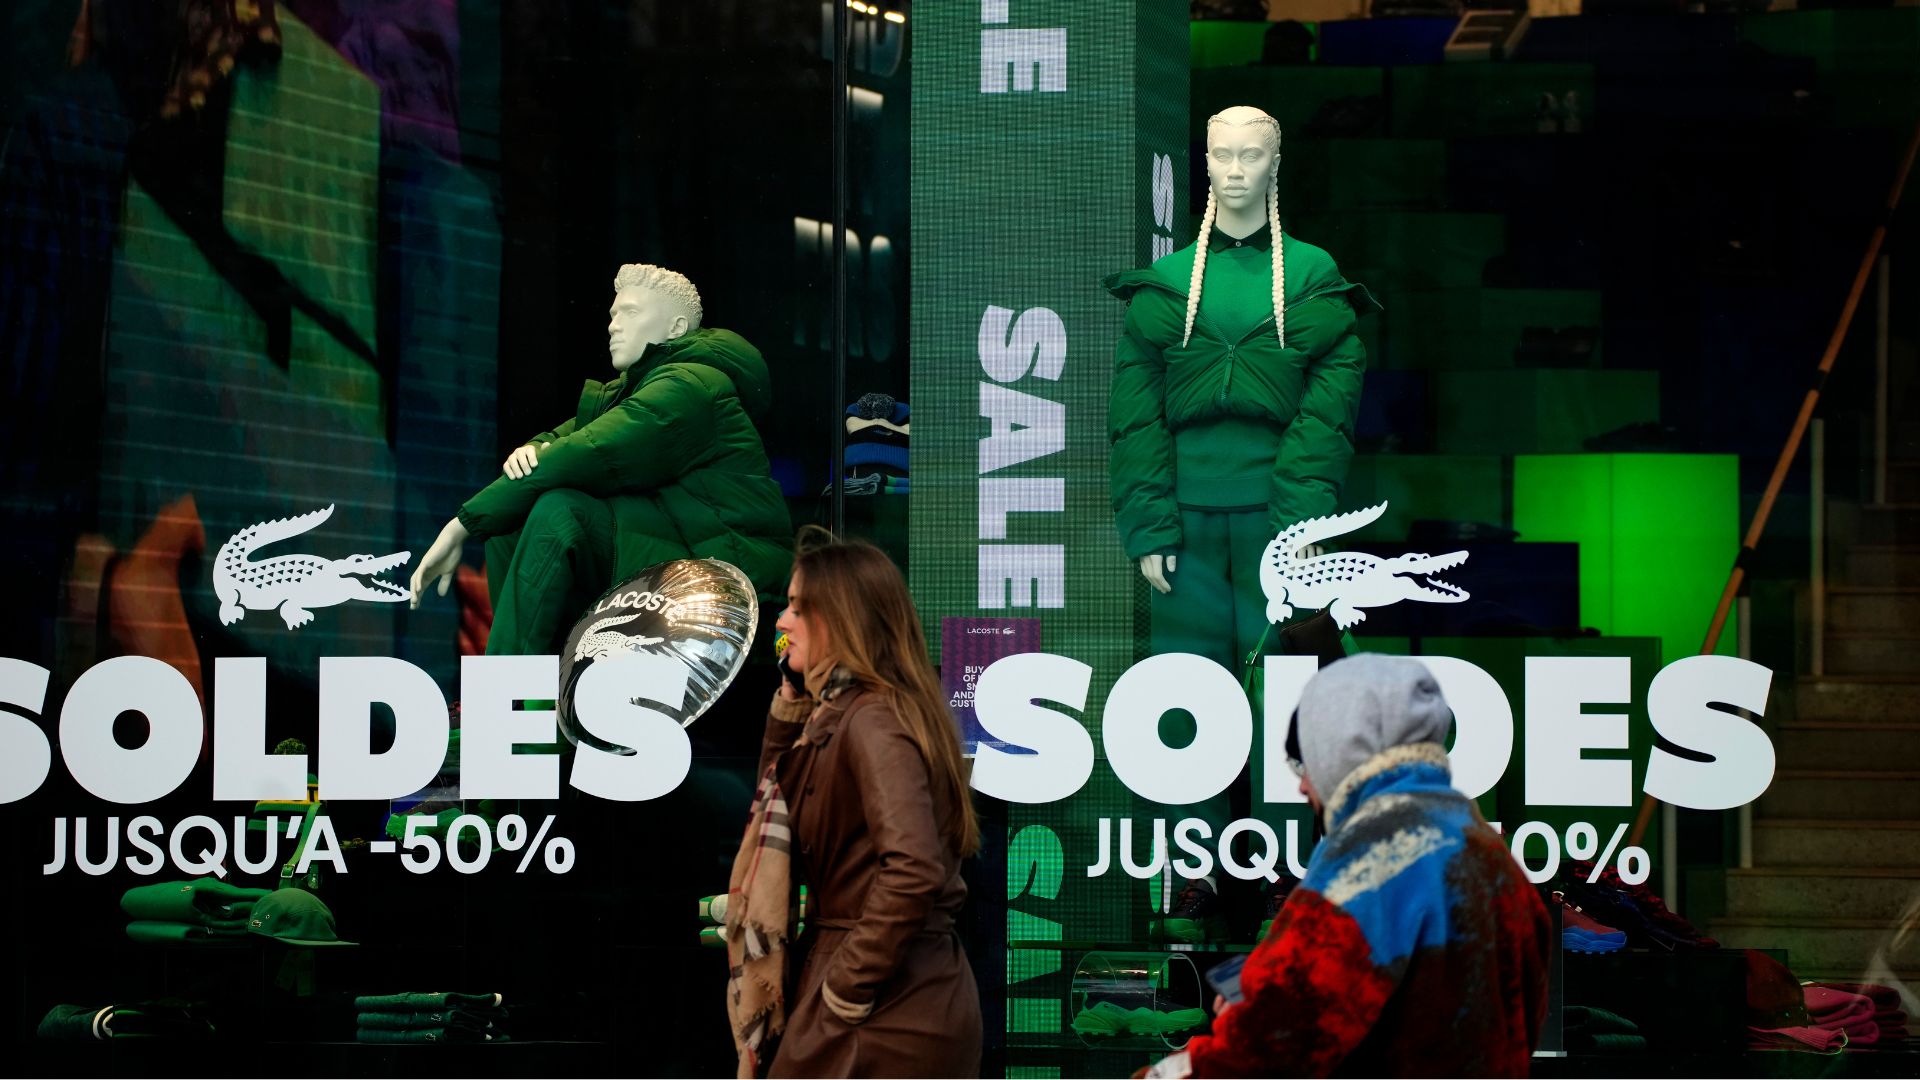 Analysts say French shoppers may be losing interest in the traditional winter sales season, which runs from January 10 to February 6 /Associated Press